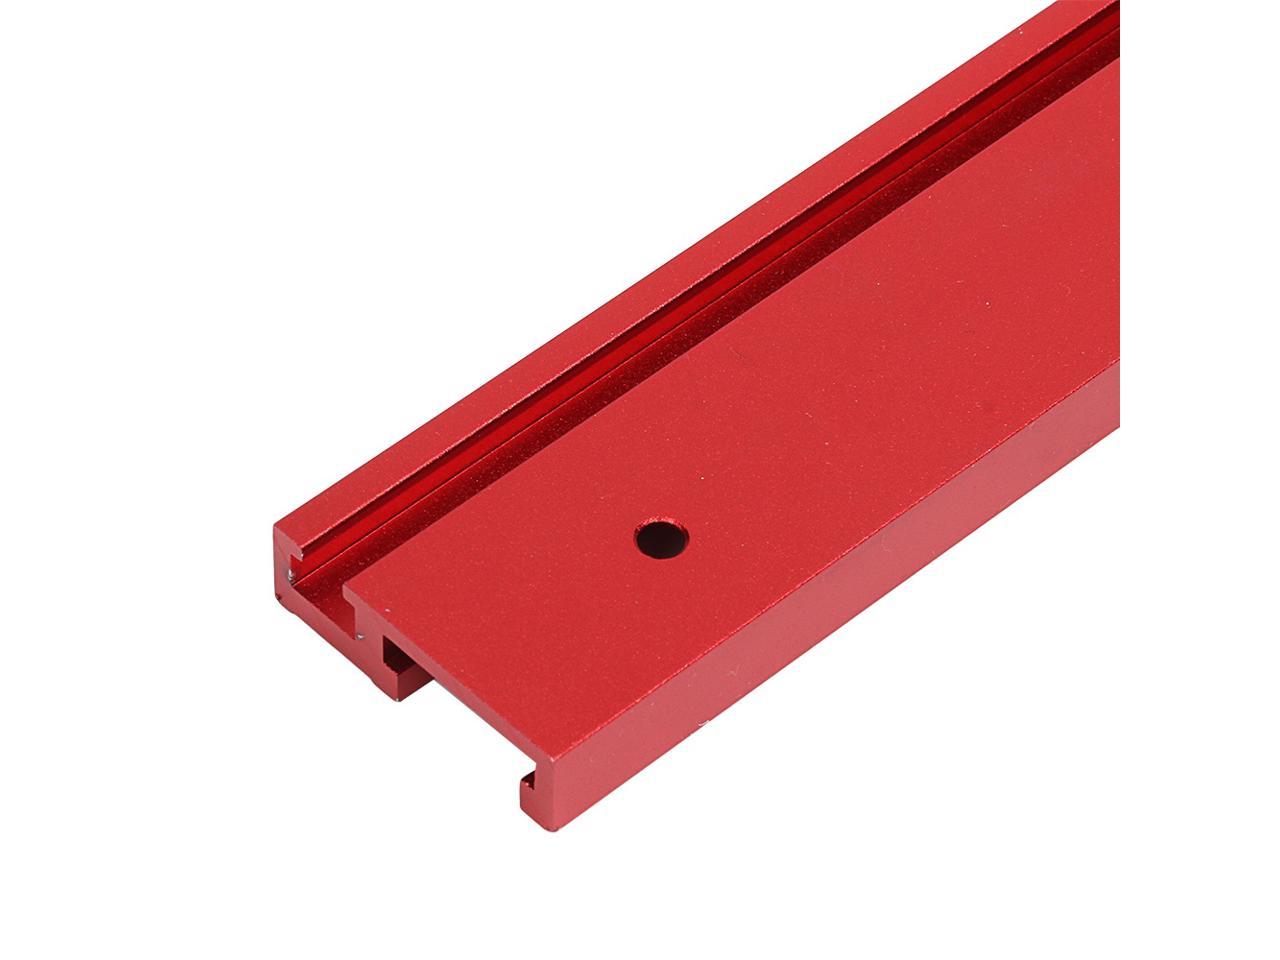 T-Track Woodworking T-slot Miter 100-1220mm Red Aluminum Alloy 45 Type